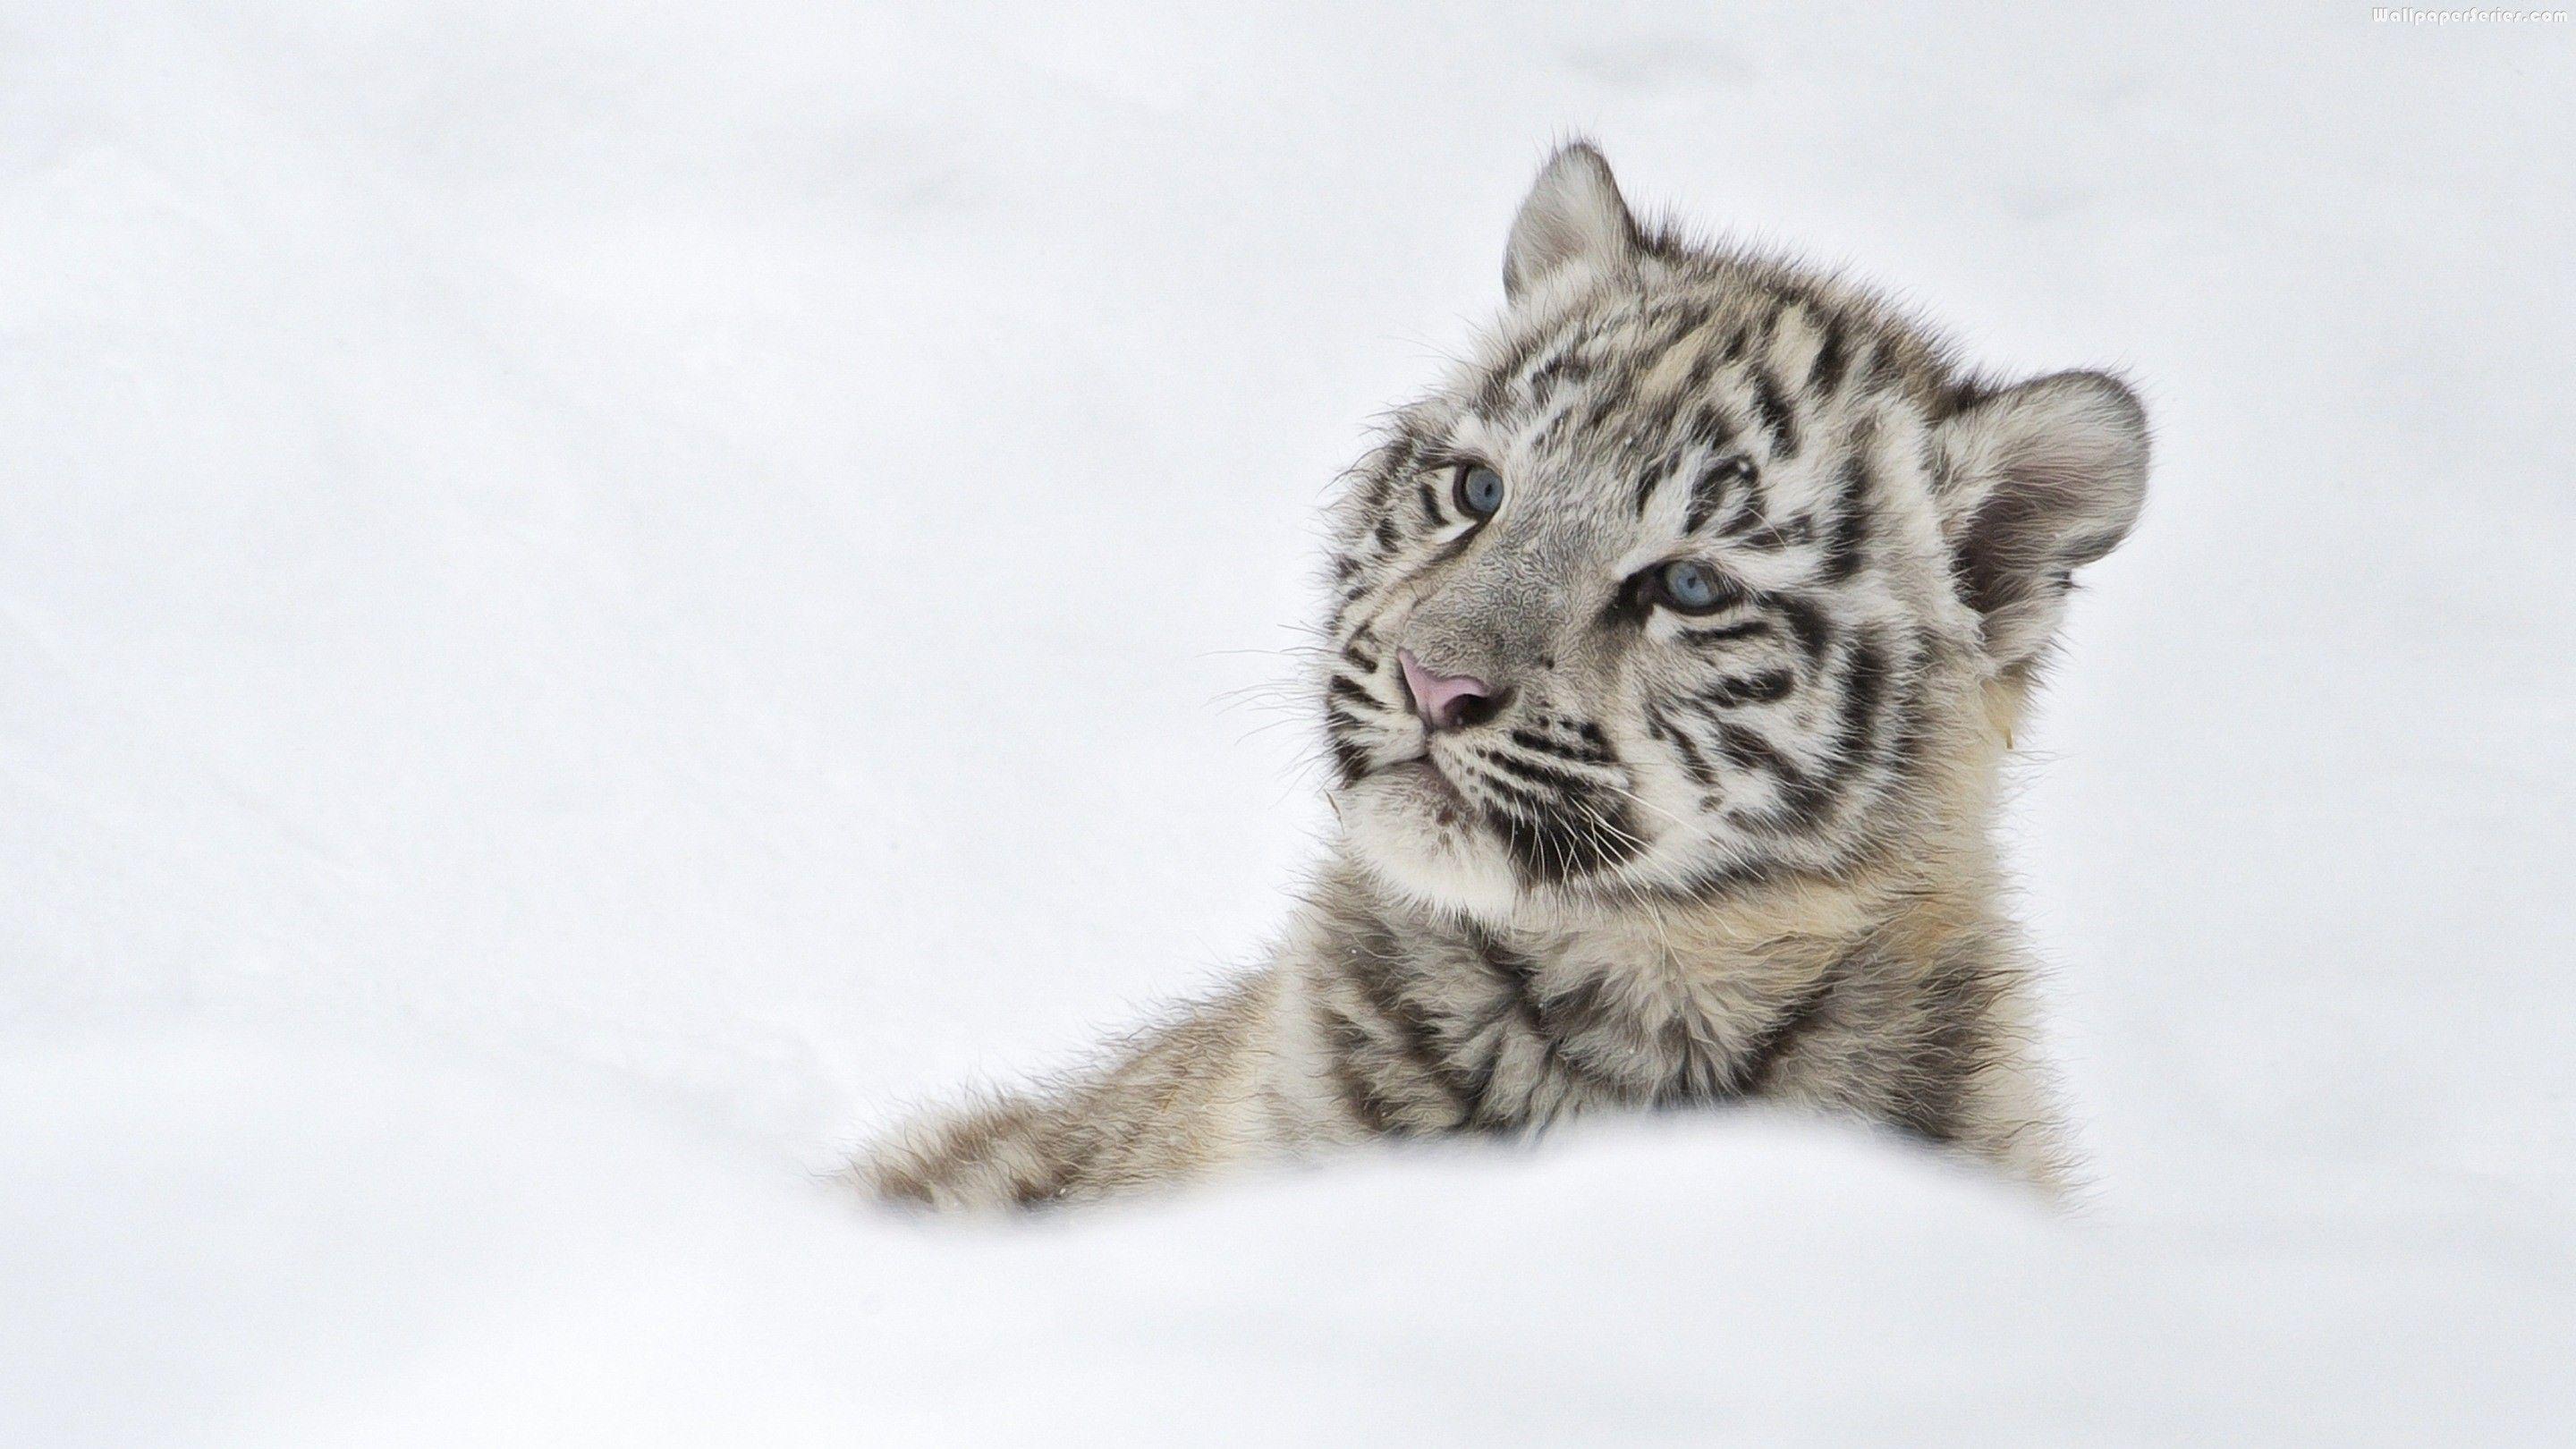 Hite Tiger Cubs In Snow HD Wallpaper, Background Image